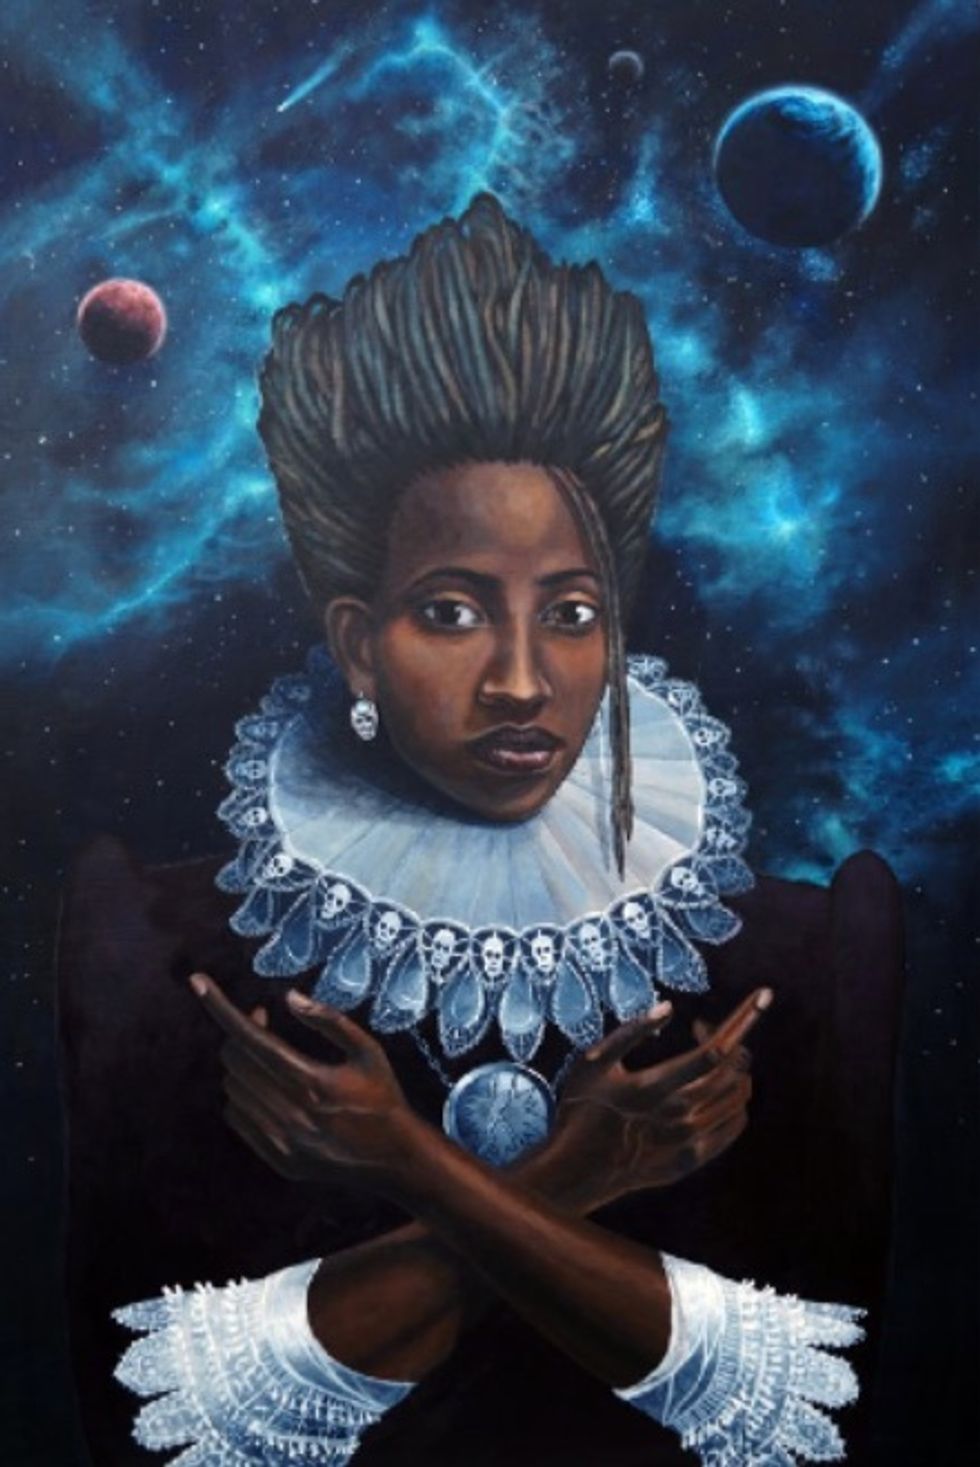 Black American Artists Reexamine Their Relationship With Africa